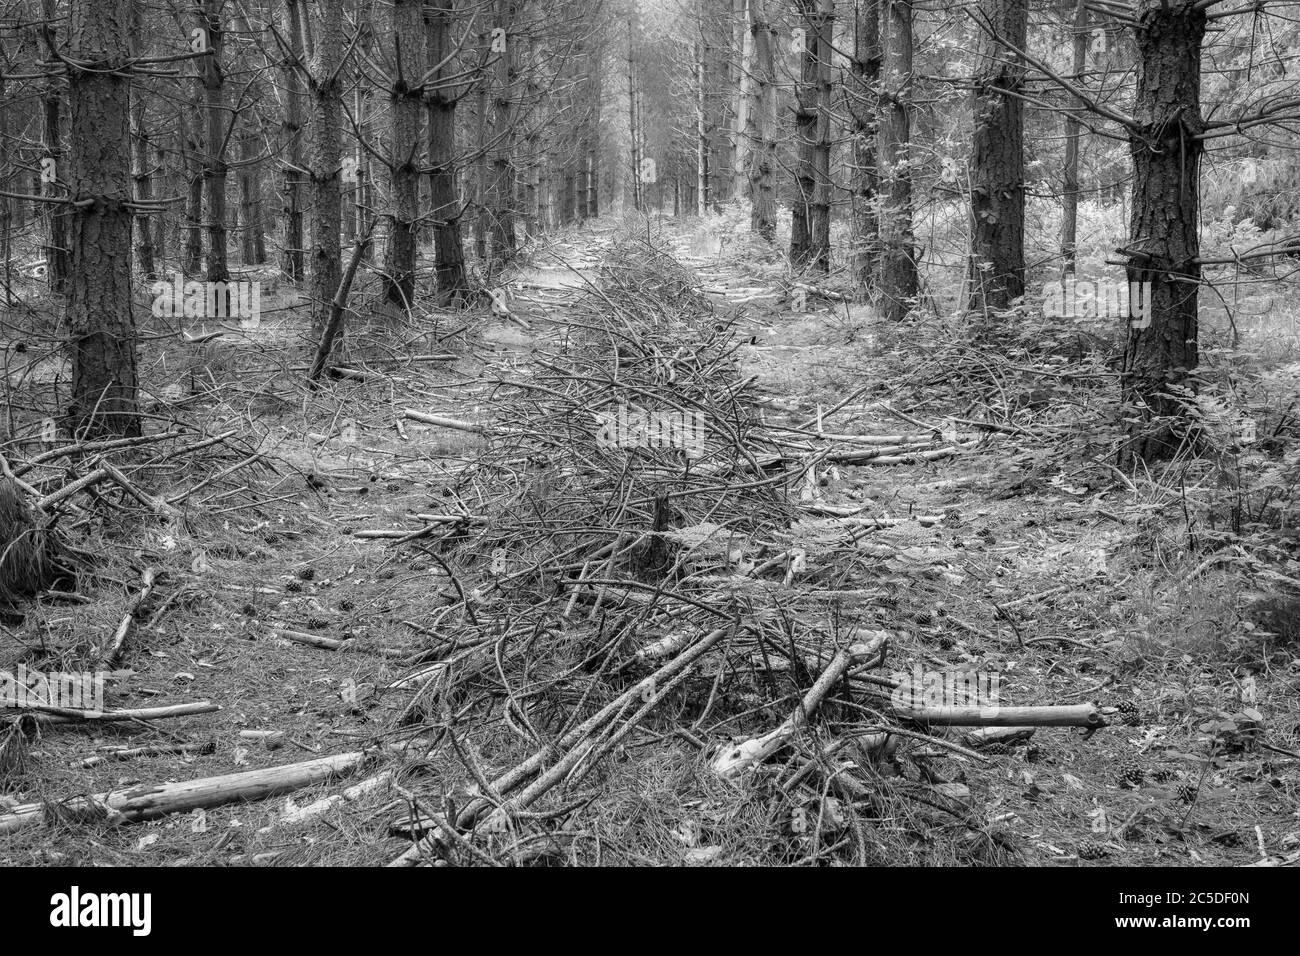 An symmetrical avenue between 2 rows of planted pine trees filled with heaped small branches diminishing into the distance. Monochrome Stock Photo